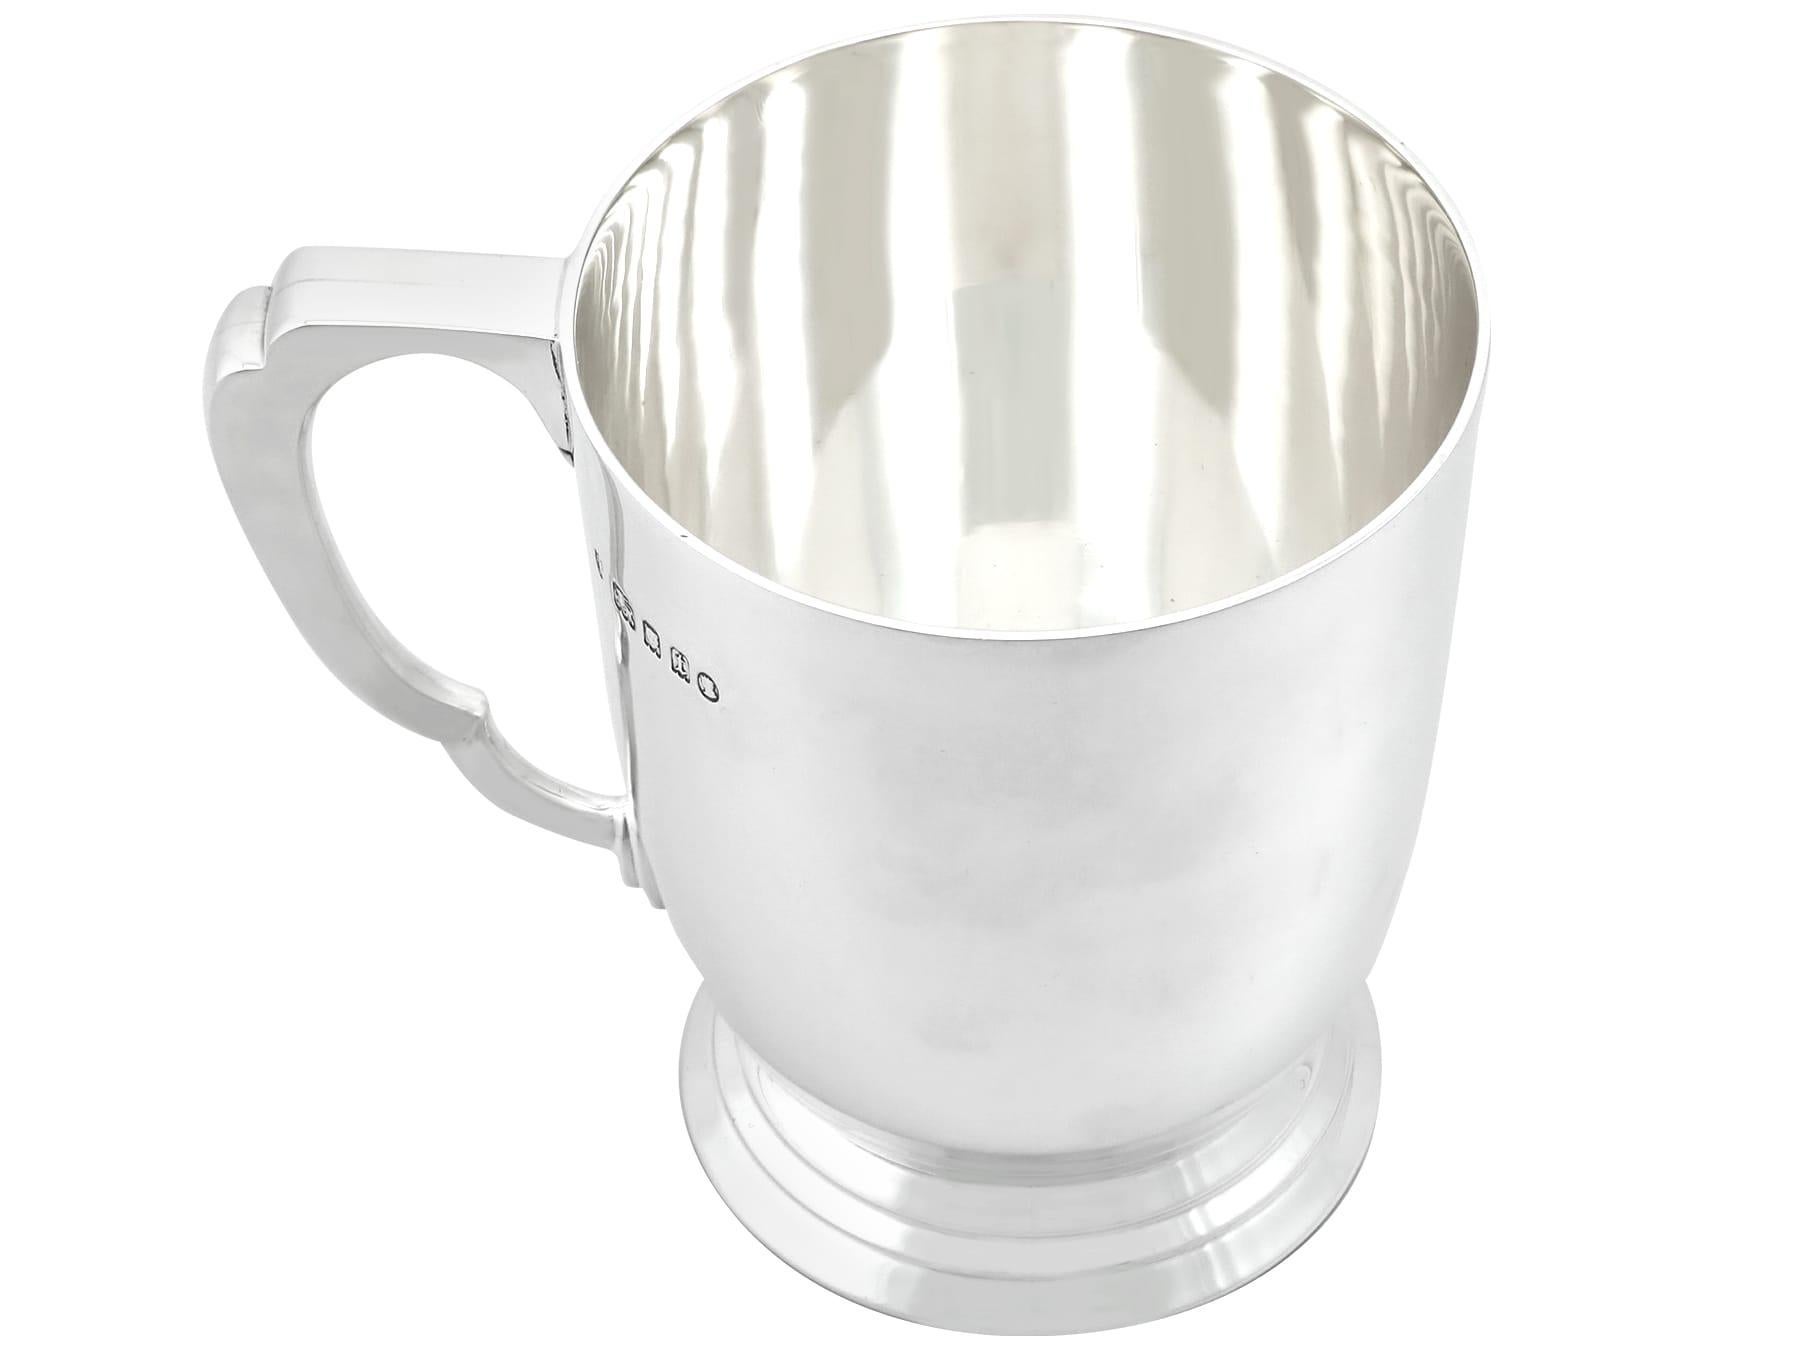 An exceptional, fine and impressive antique George V English sterling silver pint mug made by Edward Barnard & Sons Ltd in the Art Deco style; an addition to our wine and drinks related silverware collection

This exceptional antique George V